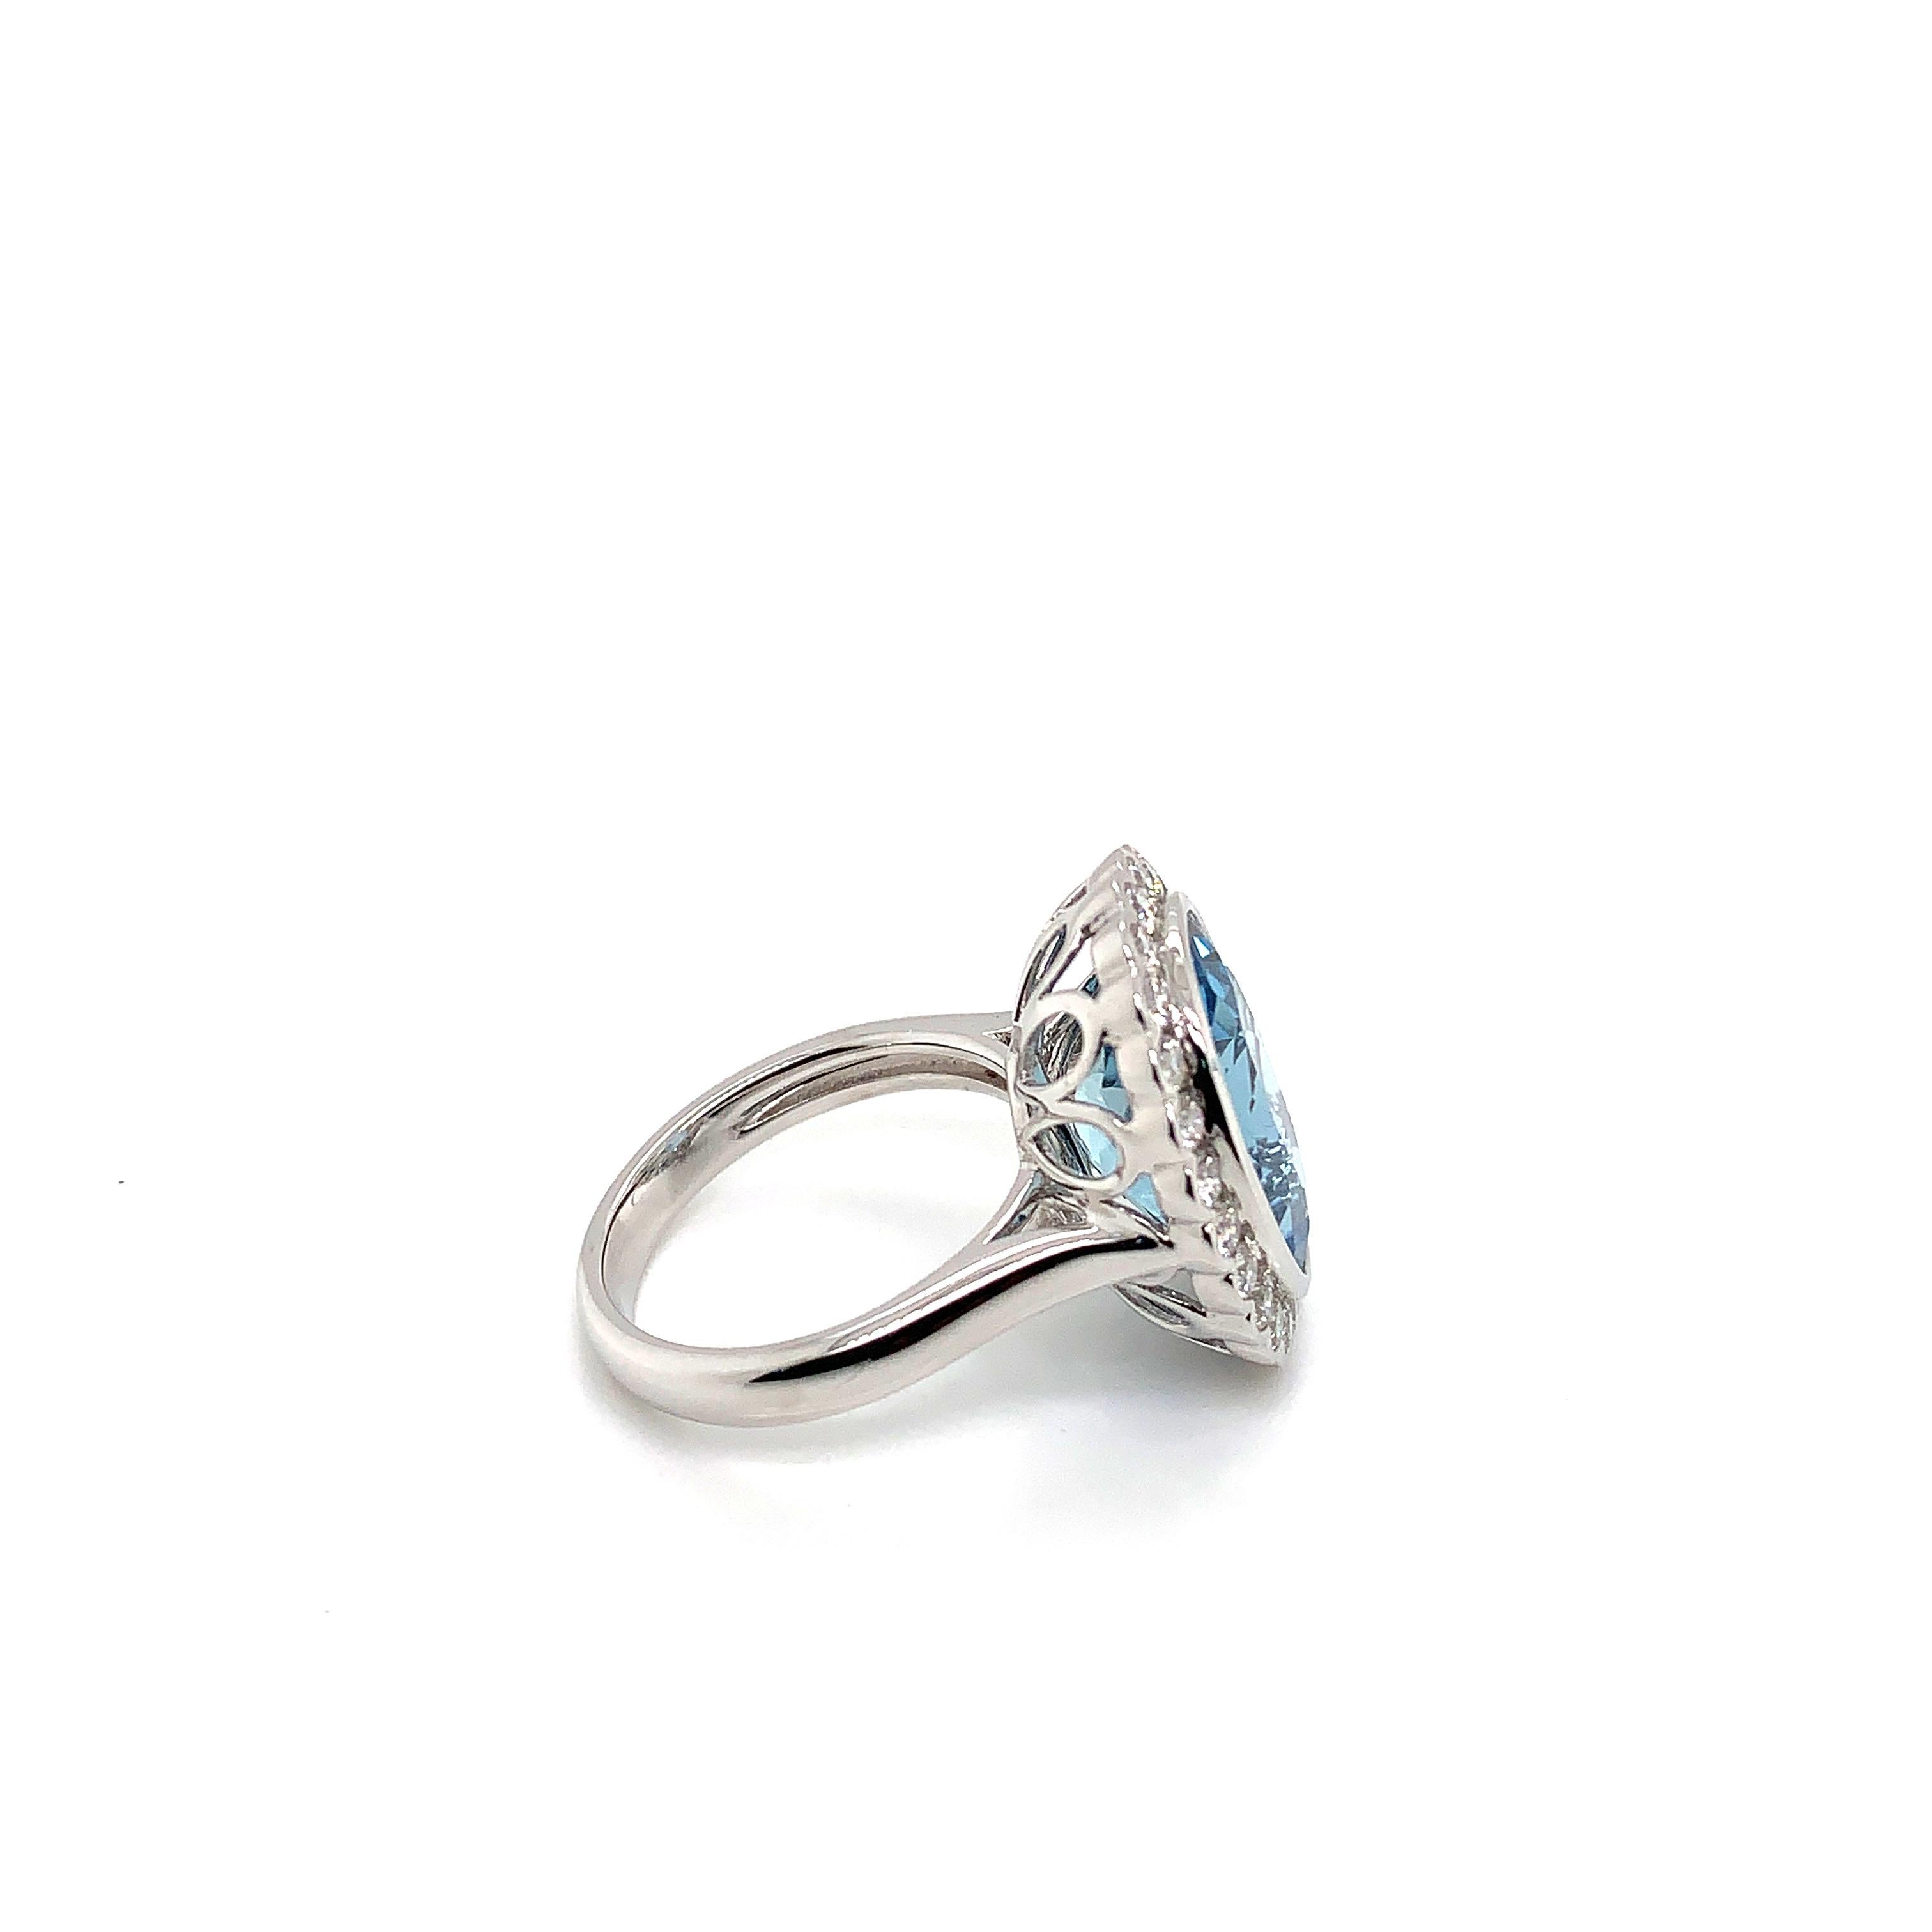 Oval Cut 7.16 Carat Oval Shaped Aquamarine Ring in 18 Karat White Gold with Diamonds